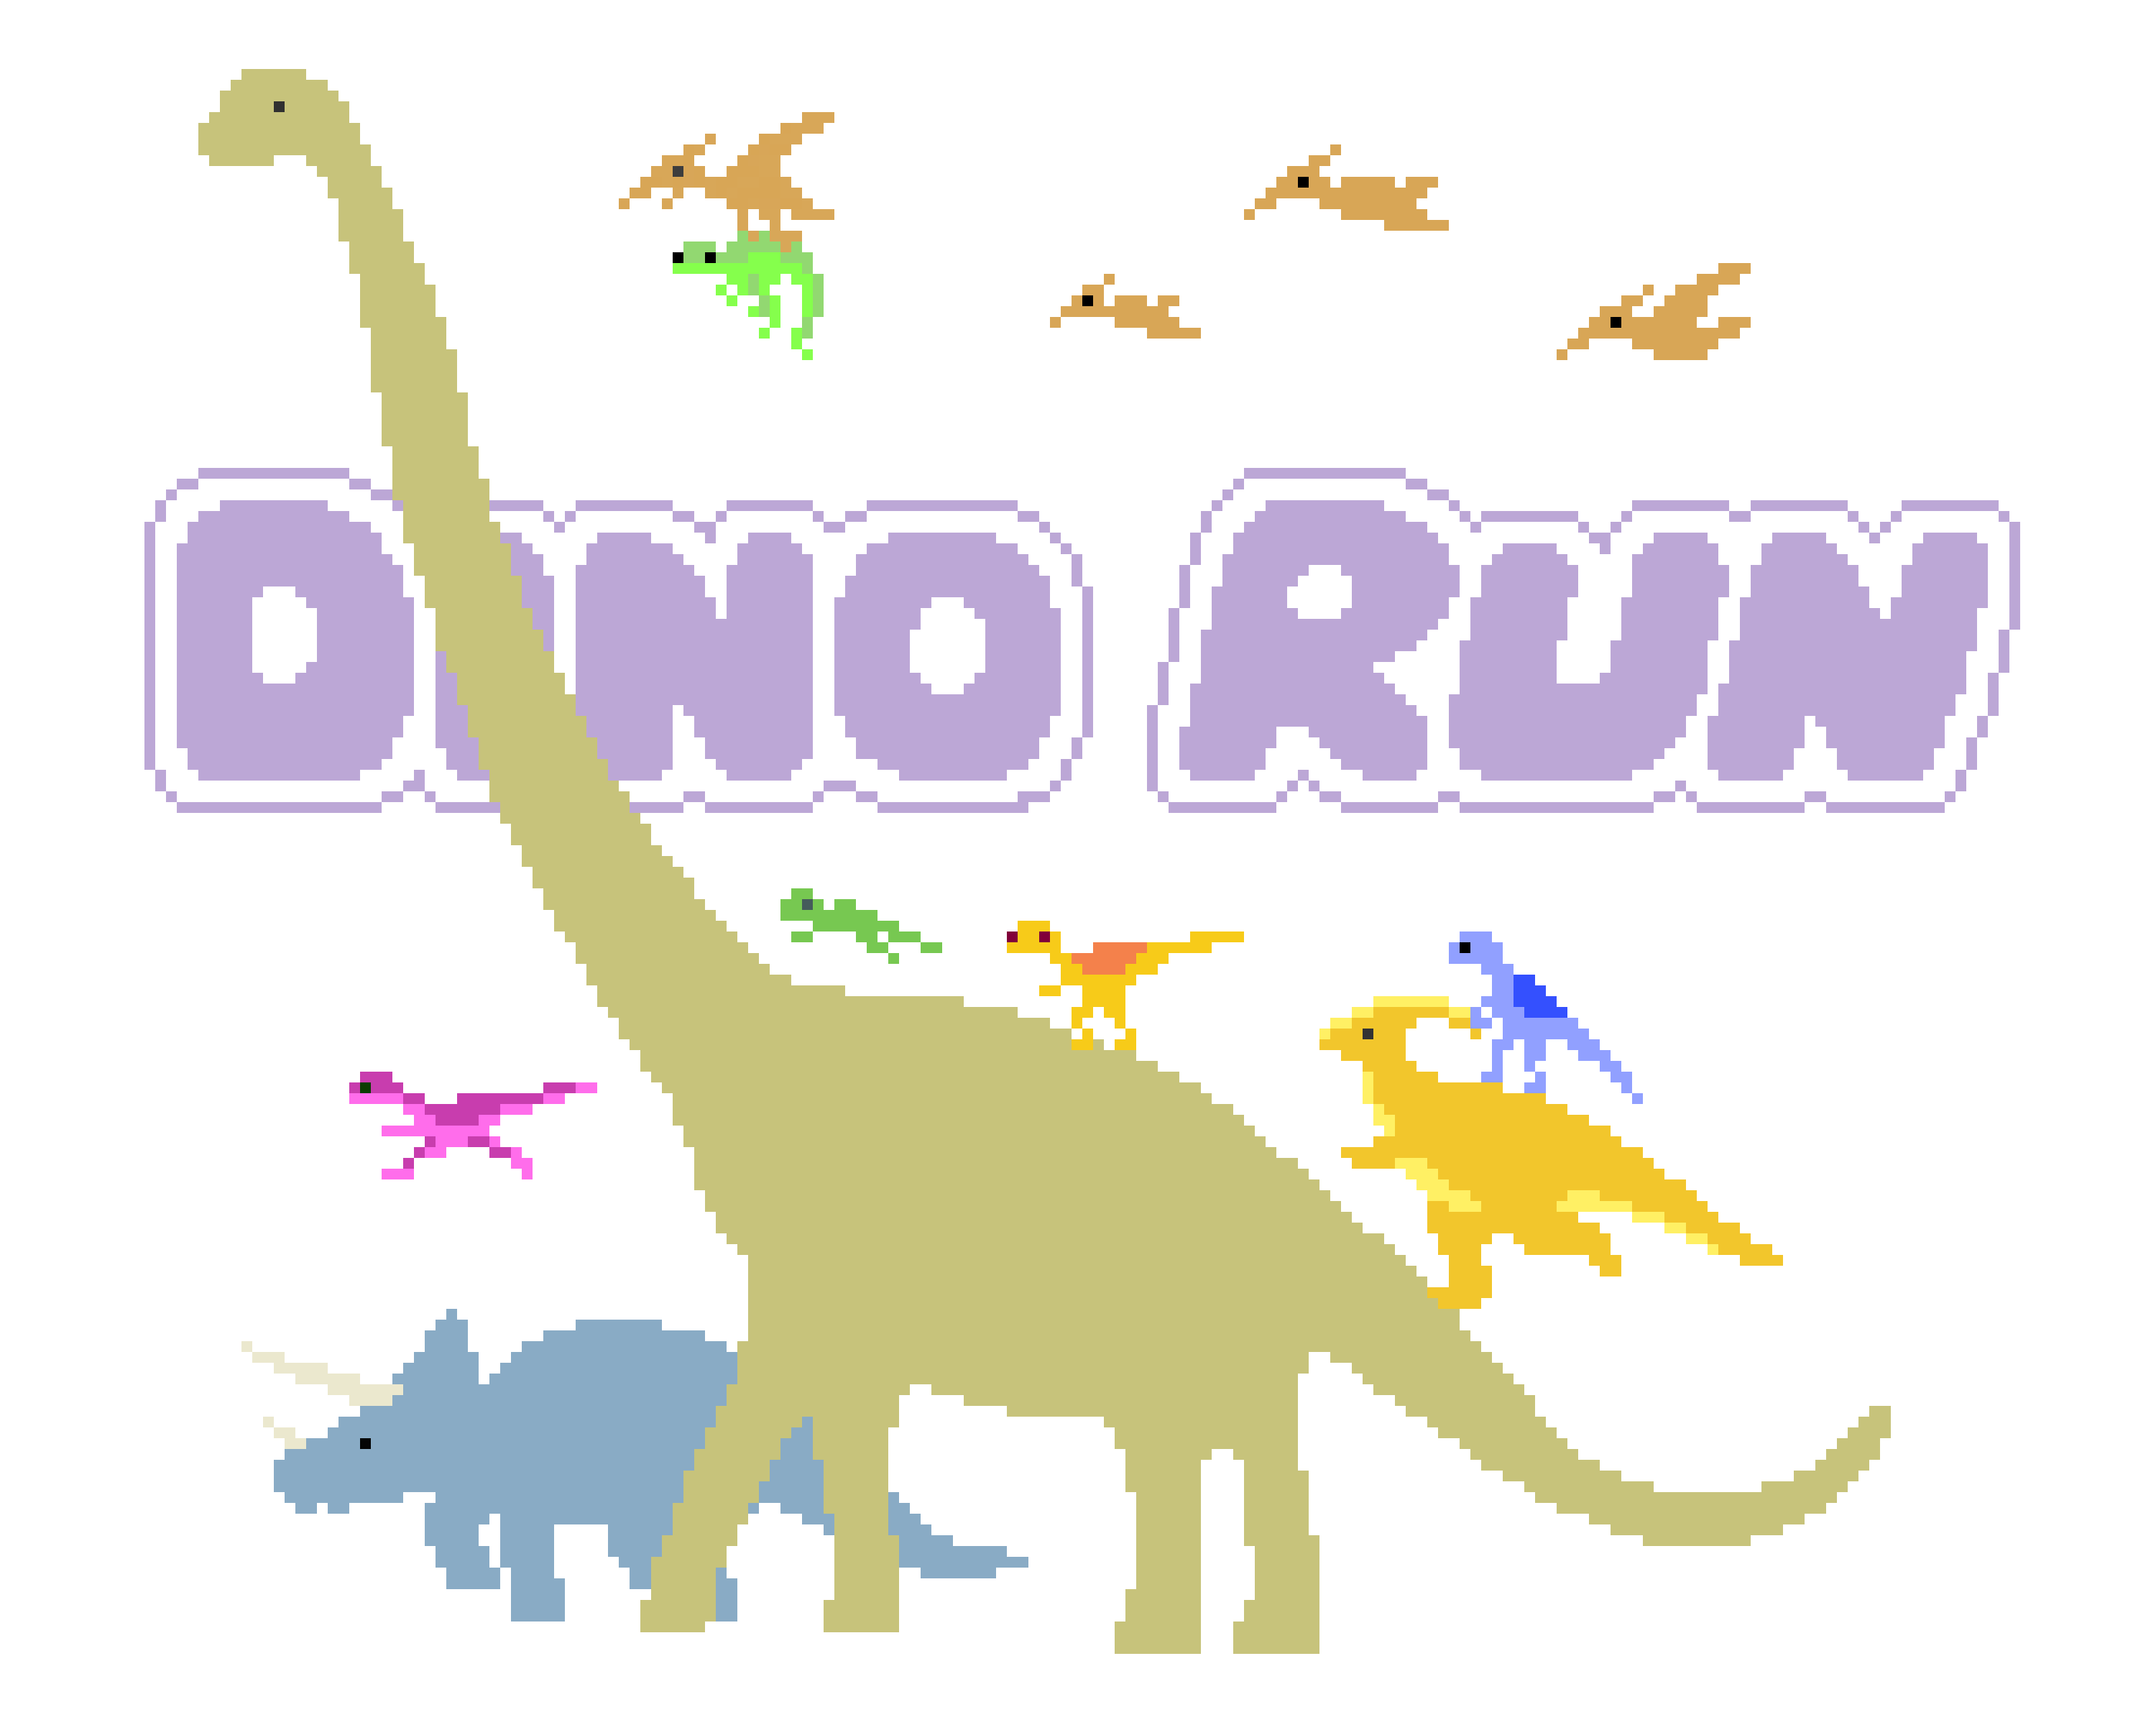 dino run. go on steam and get dino run or support the creation of dino run 2!  : r/PixelArt